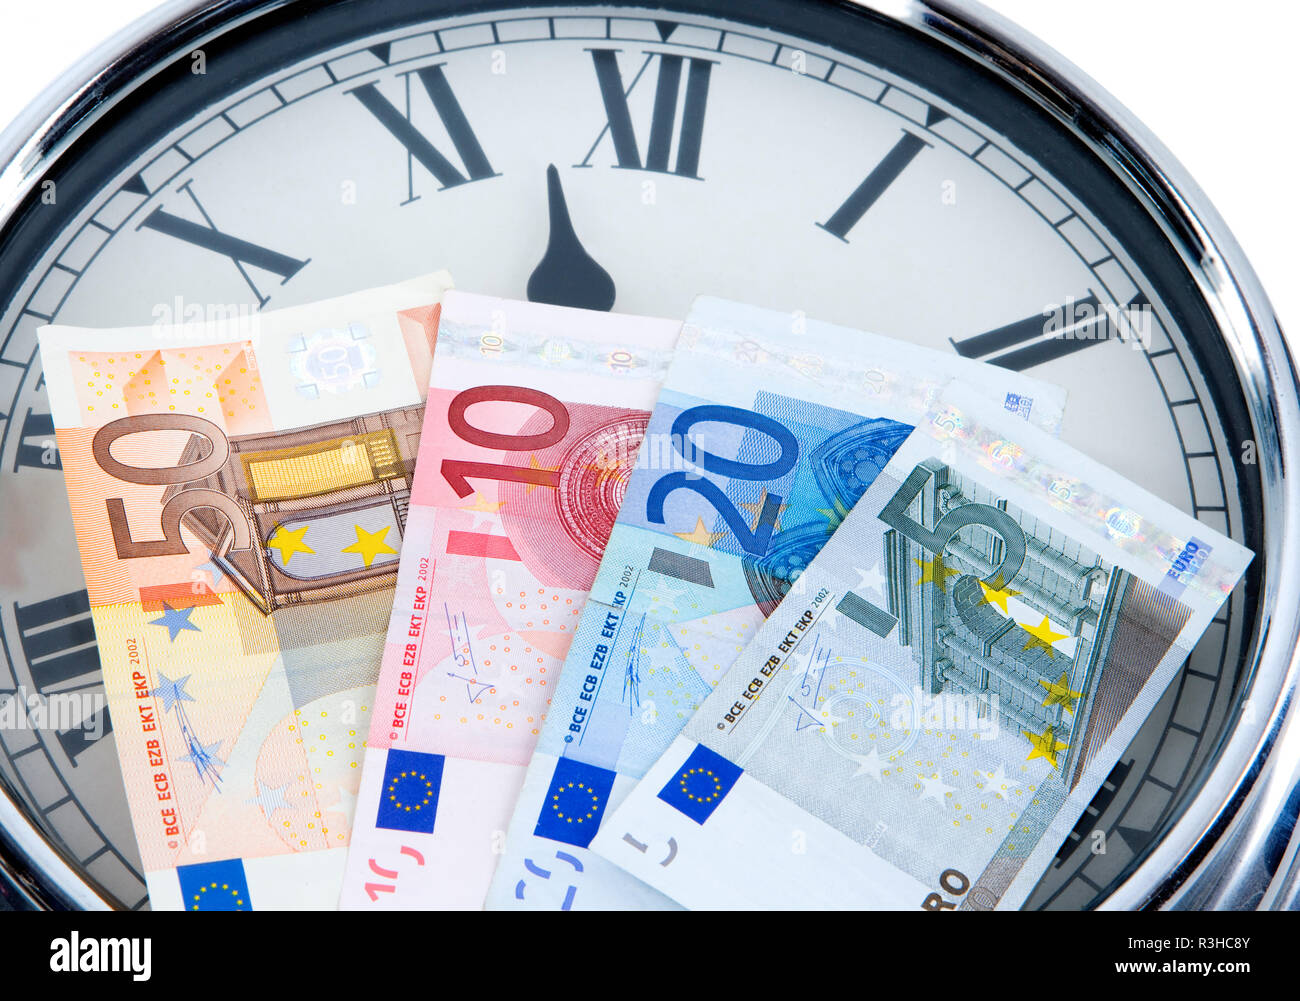 time is money Stock Photo